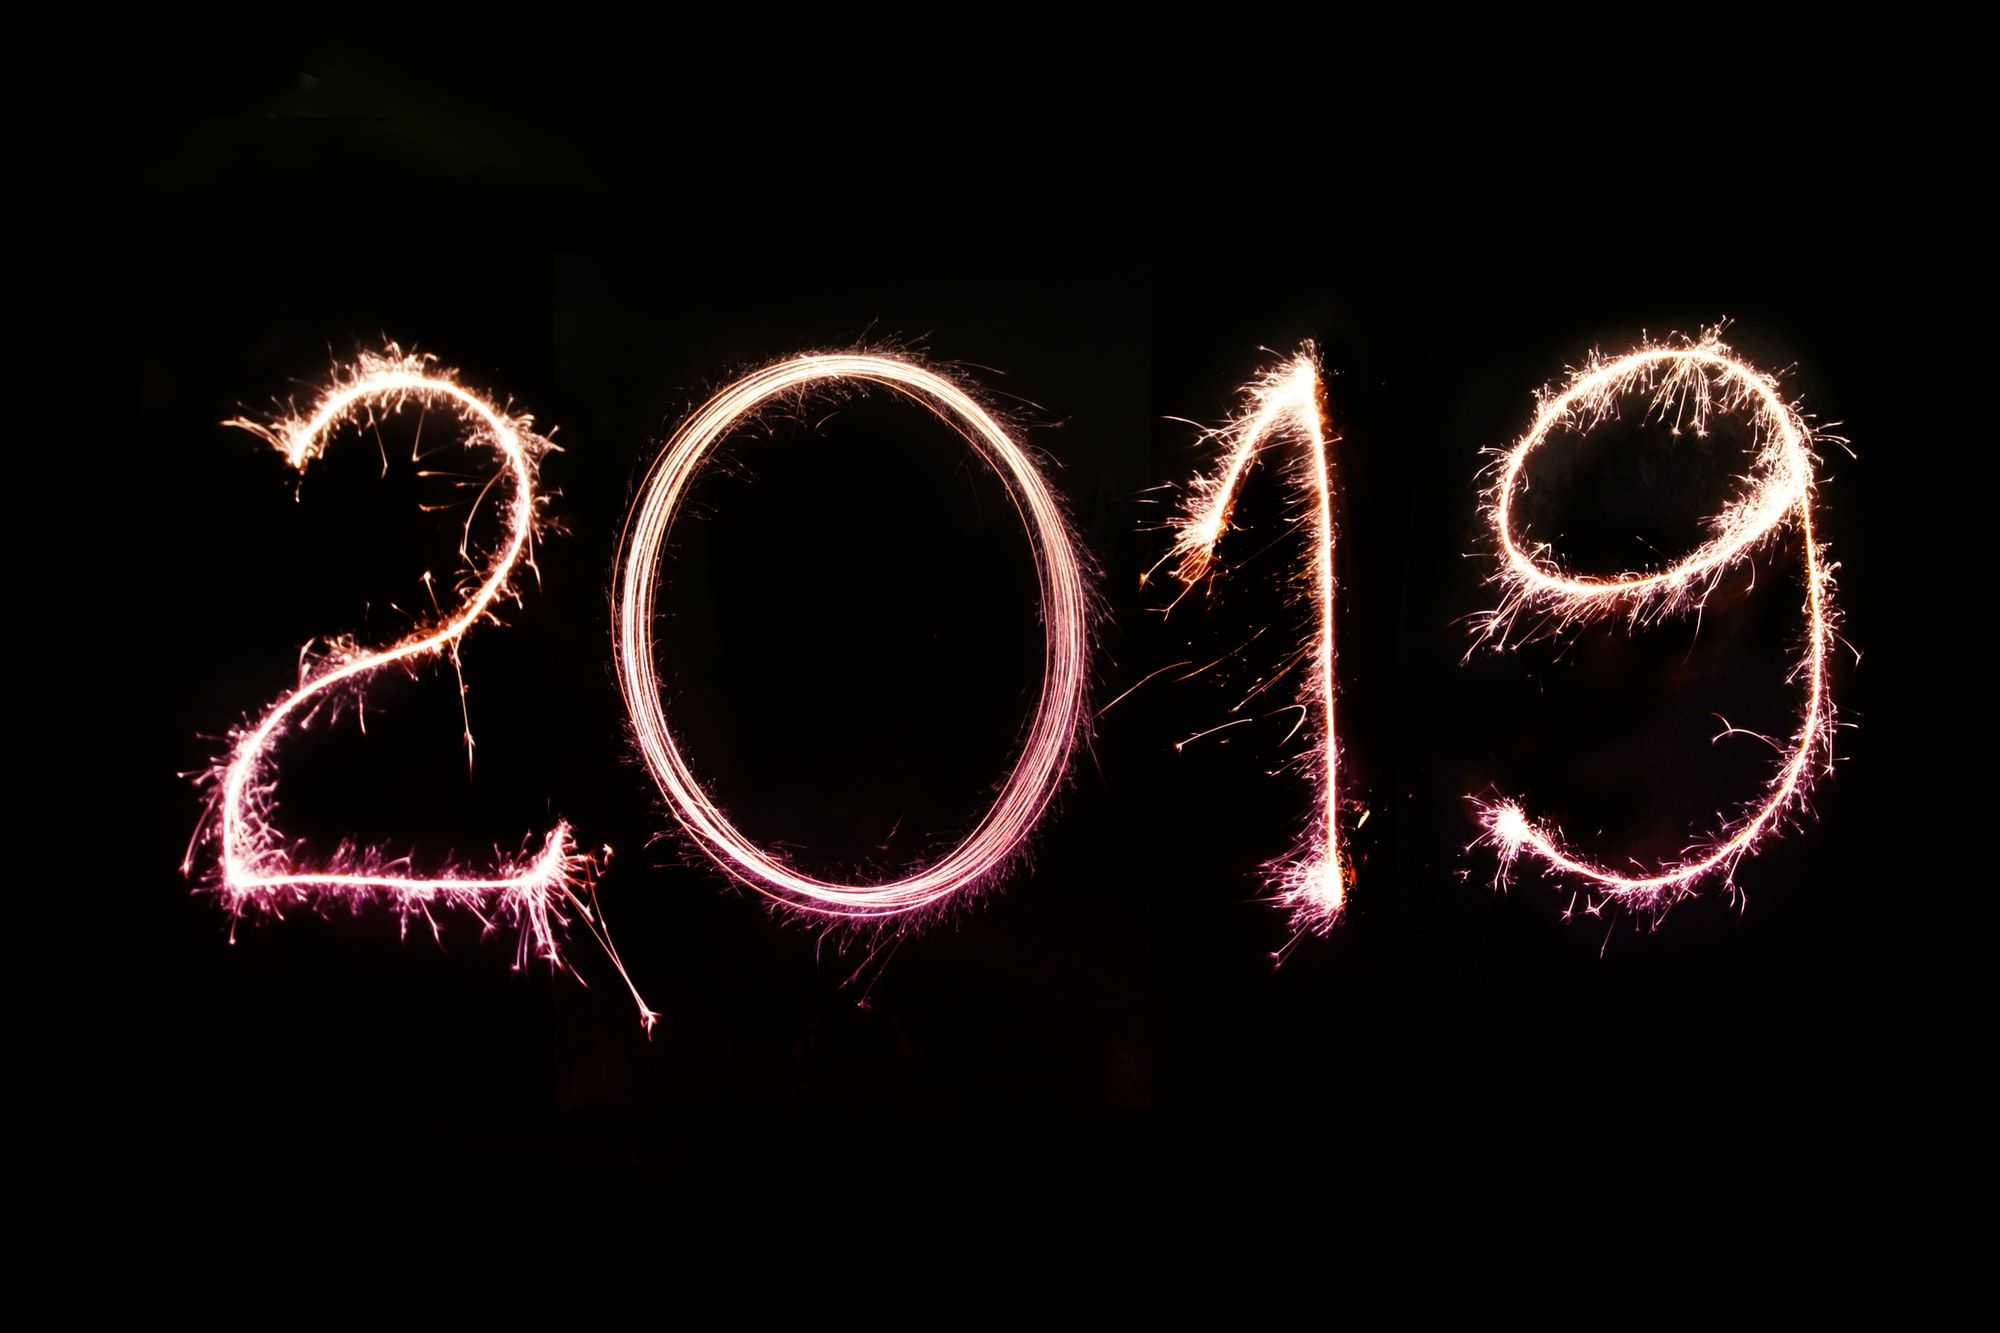 Long exposure photo of the 2019 numbers created with sparklers on a pitch-black background. Perfect for 2019 greeting cards and newsletter e-mails, personal and business social media & blog posts. 

More shots like this > https://www.shutterstock.com/g/pink+broccoli
Follow us on Instagram > https://www.instagram.com/nordwood
For fierce WordPress bloggers > https://themeforest.net/user/nordwood/portfolio